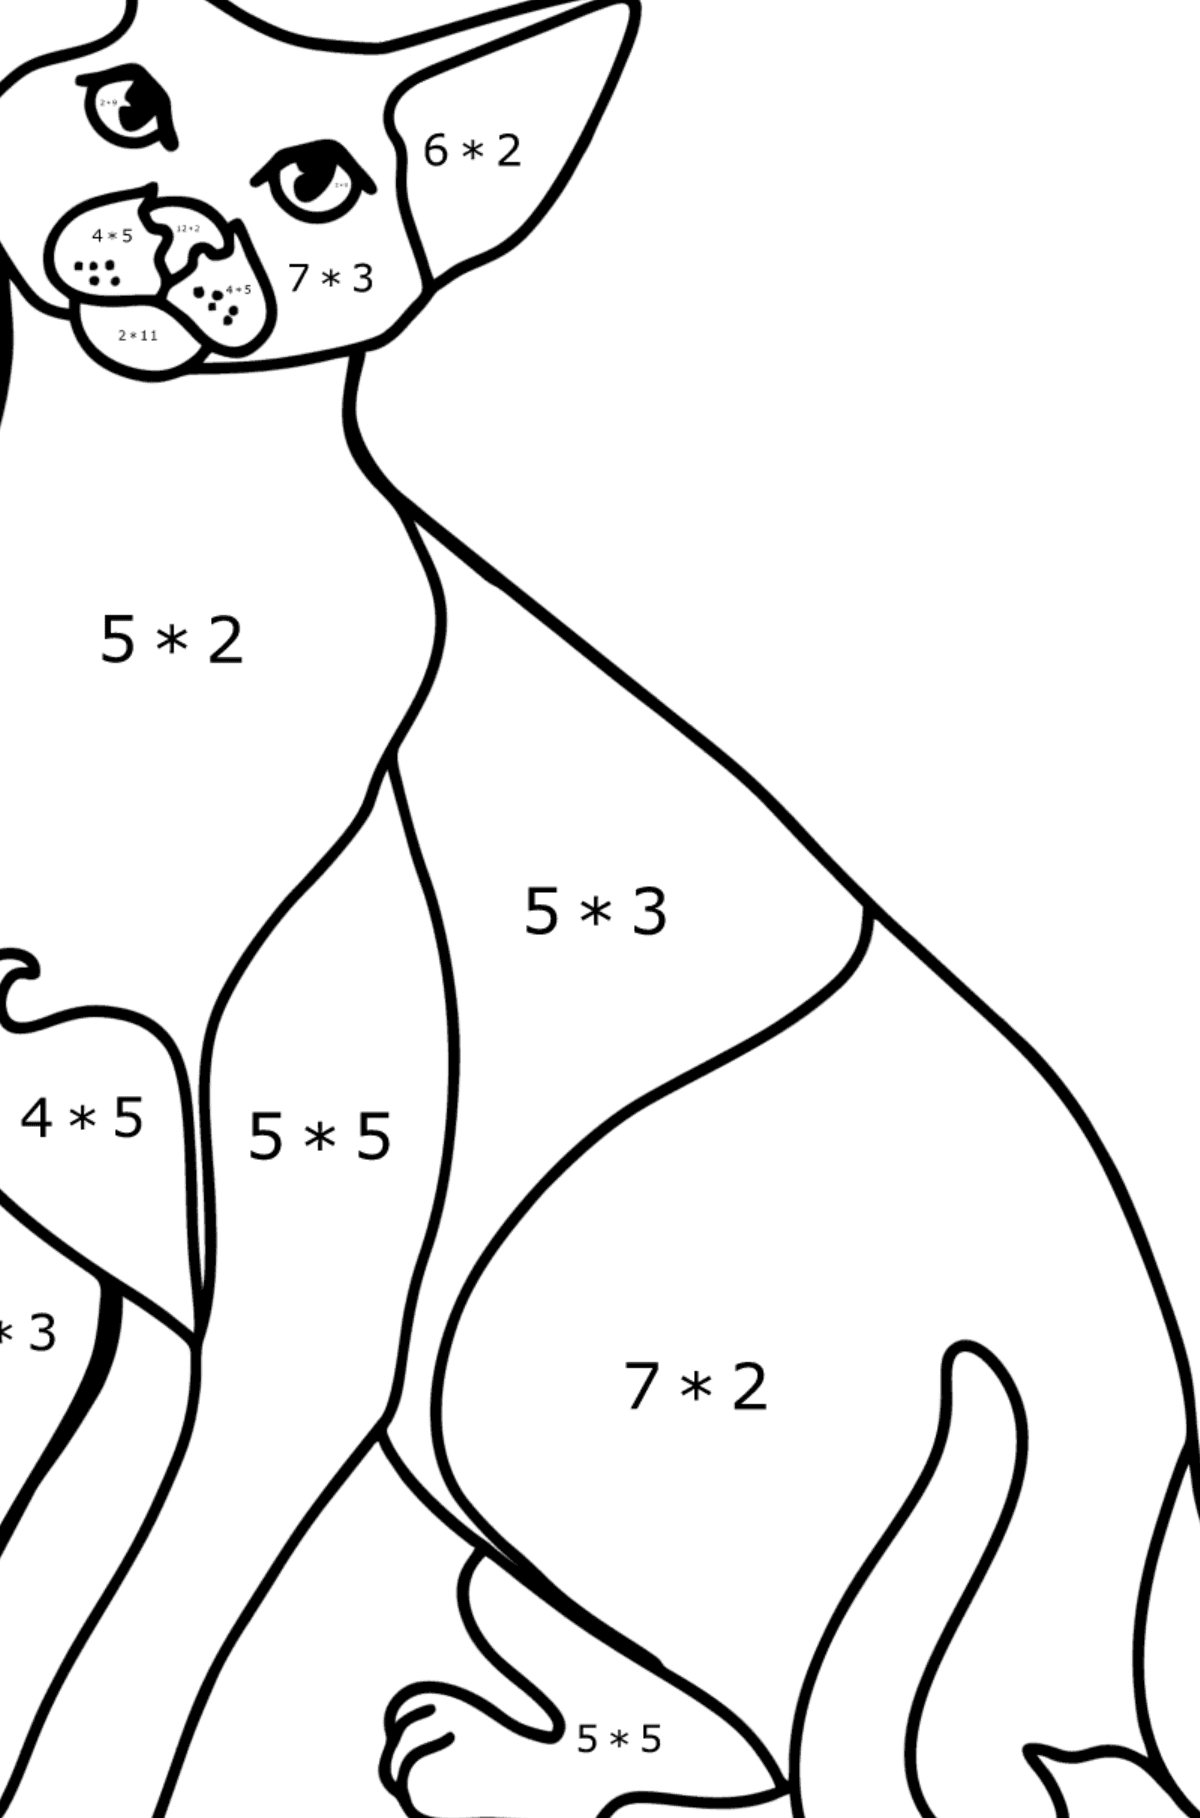 Oriental Shorthair Cat coloring page - Math Coloring - Multiplication for Kids